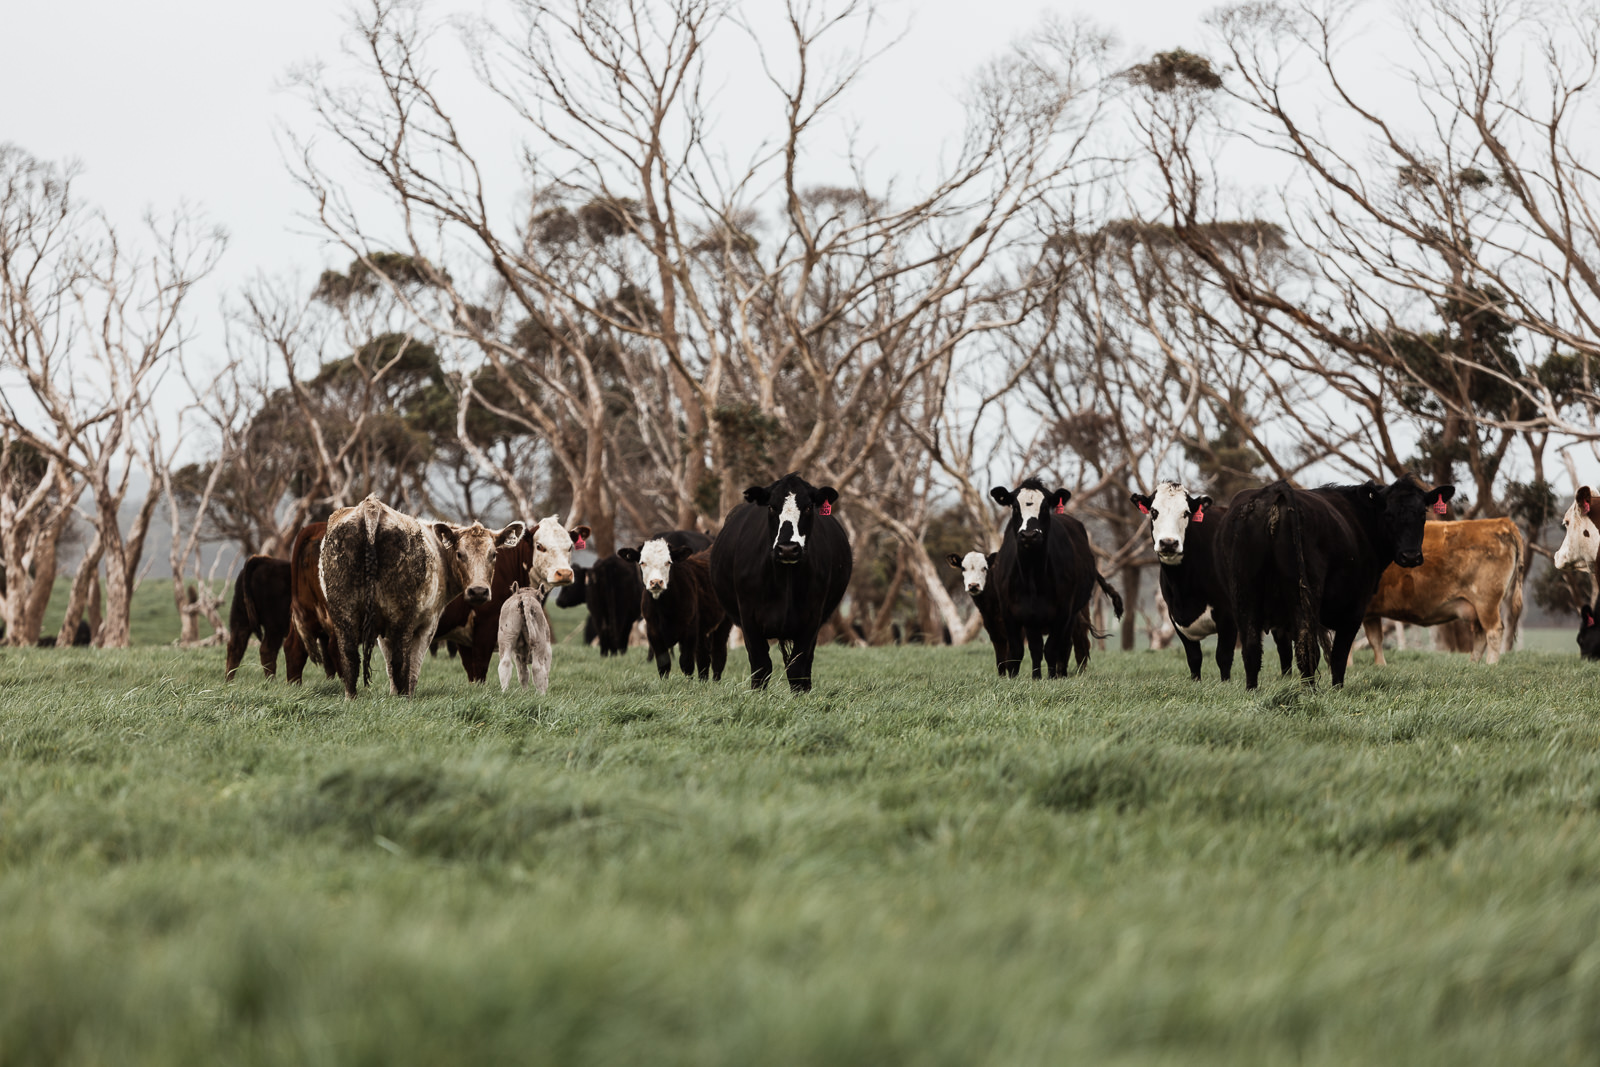 Greenham’s cull beef cows were scoring high on the MSA grading system.